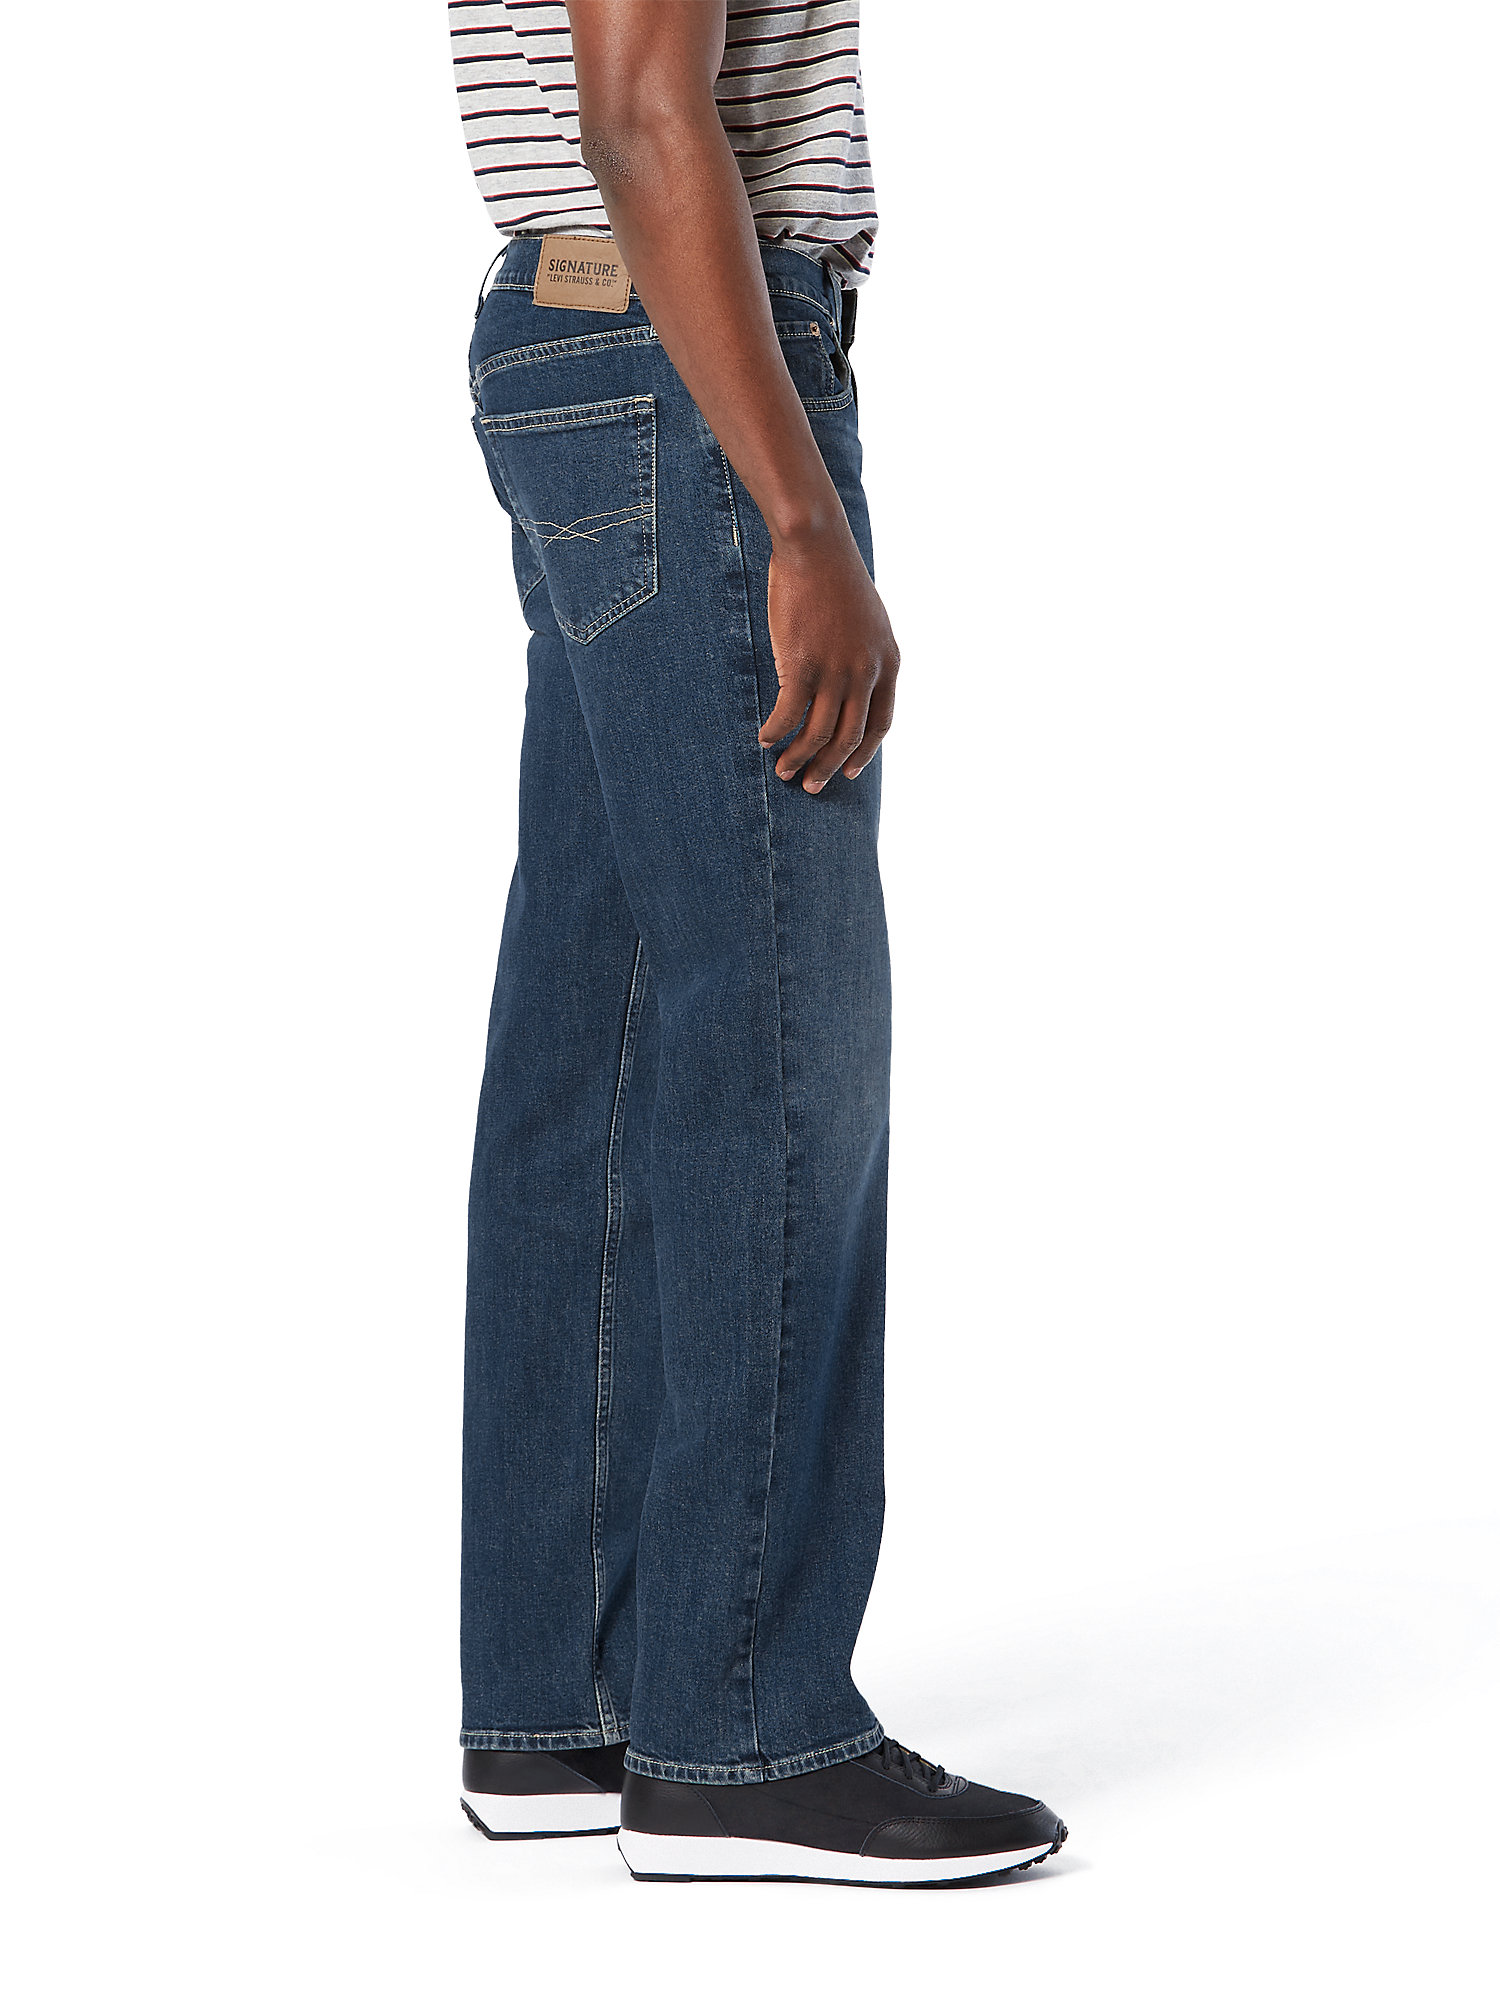 Signature by Levi Strauss & Co. Men's and Big and Tall Relaxed Fit Jeans - image 4 of 6